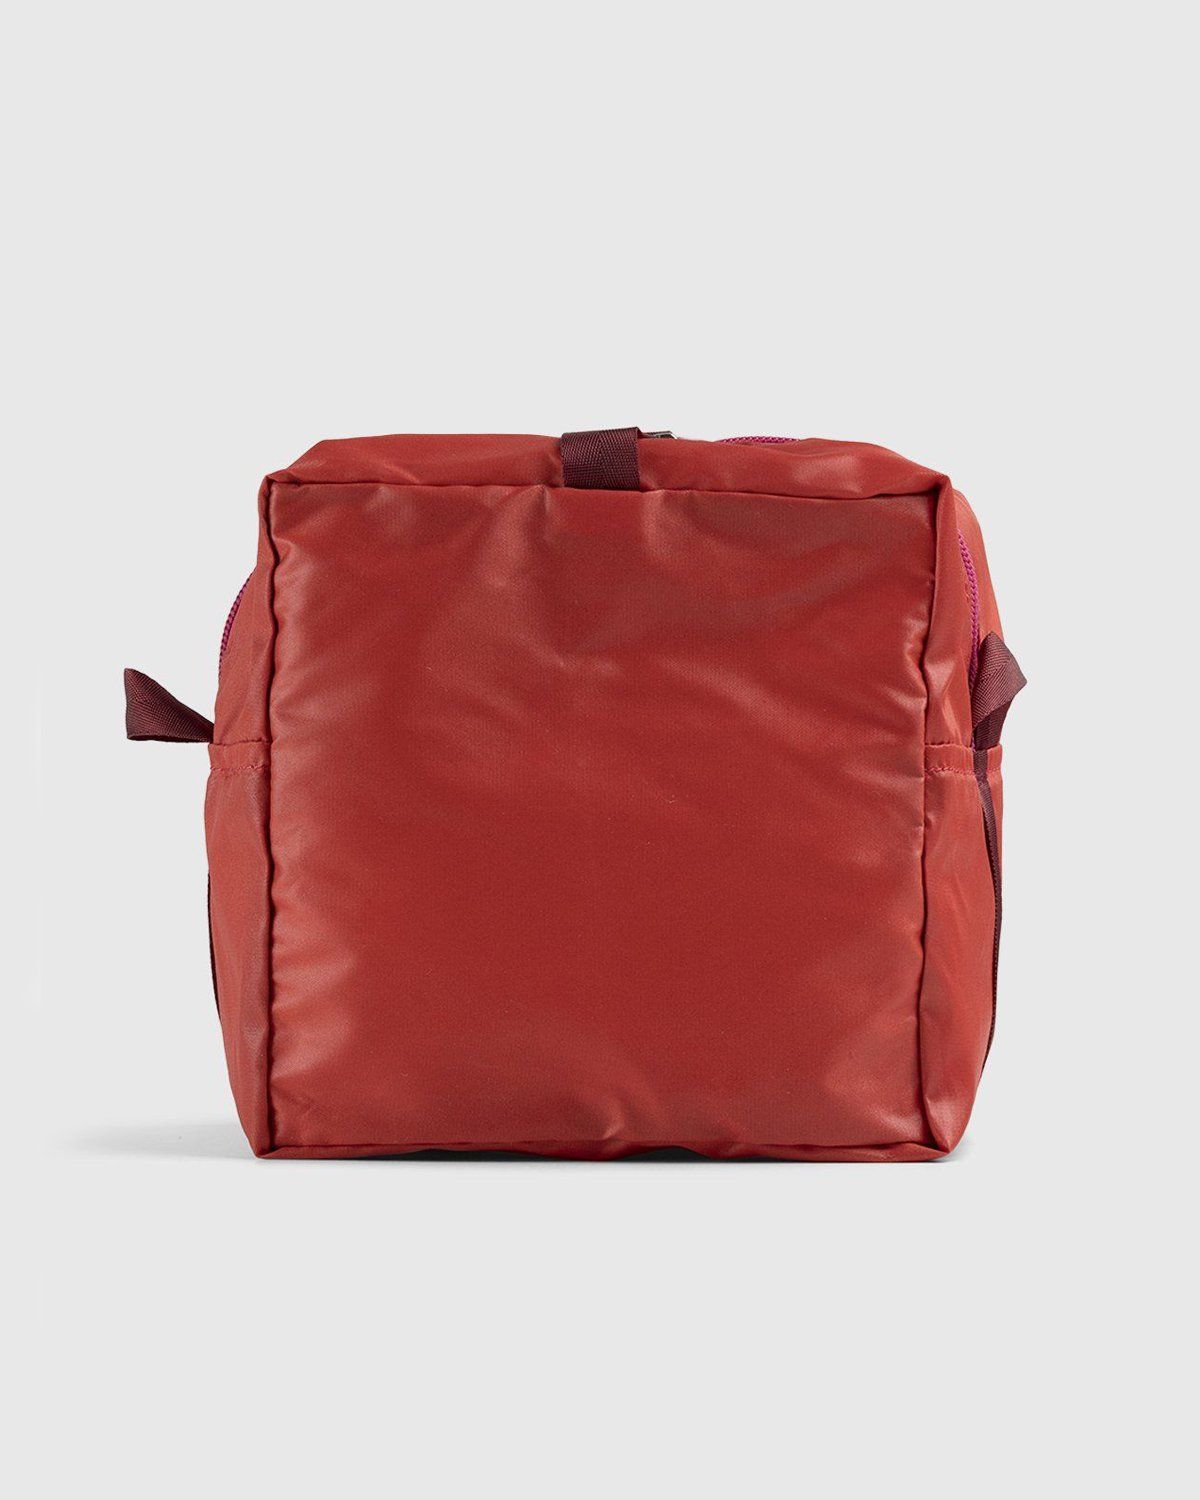 Porter-Yoshida & Co. – Snack Pack Pouch Scarlet - Bags - Red - Image 2